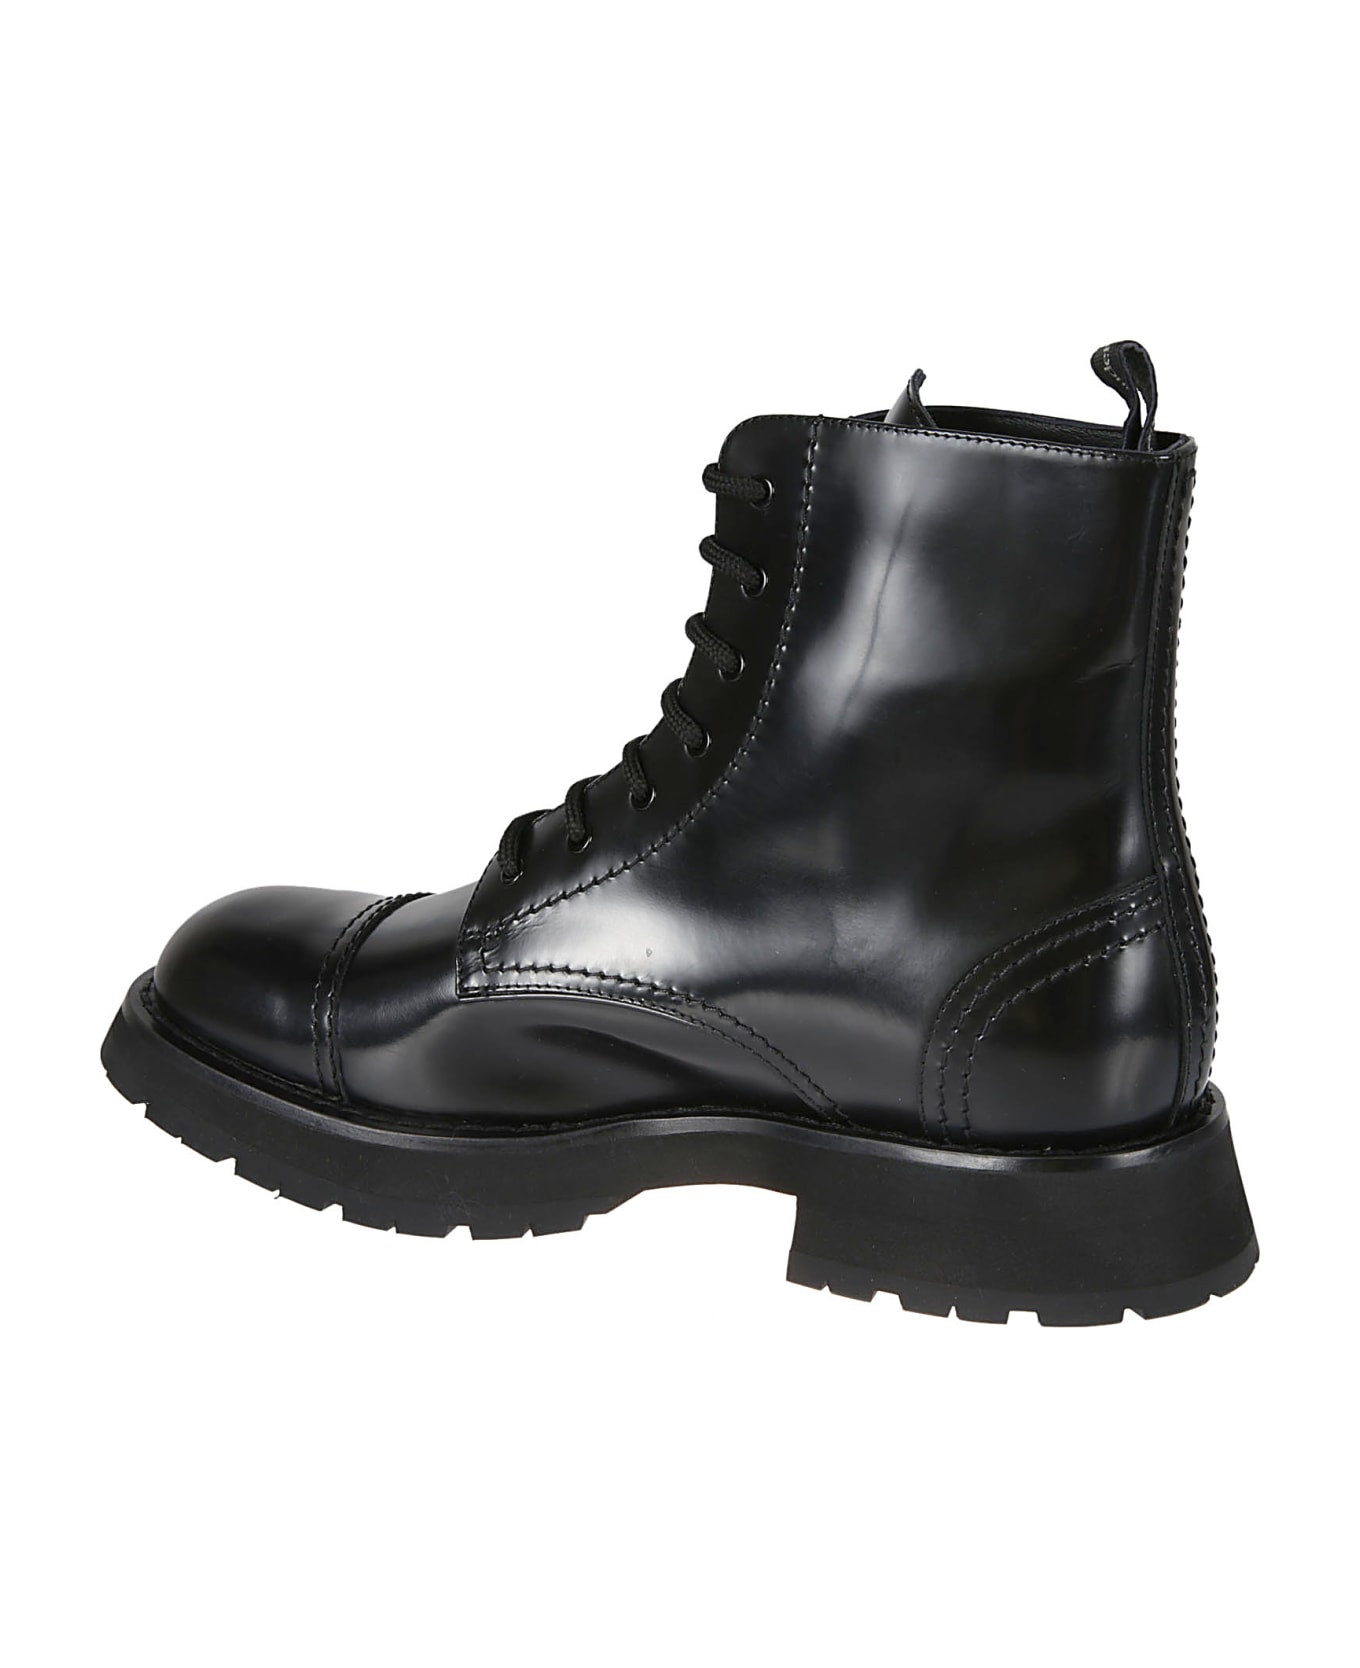 Alexander McQueen Lace-up Leather Boots - BLACK